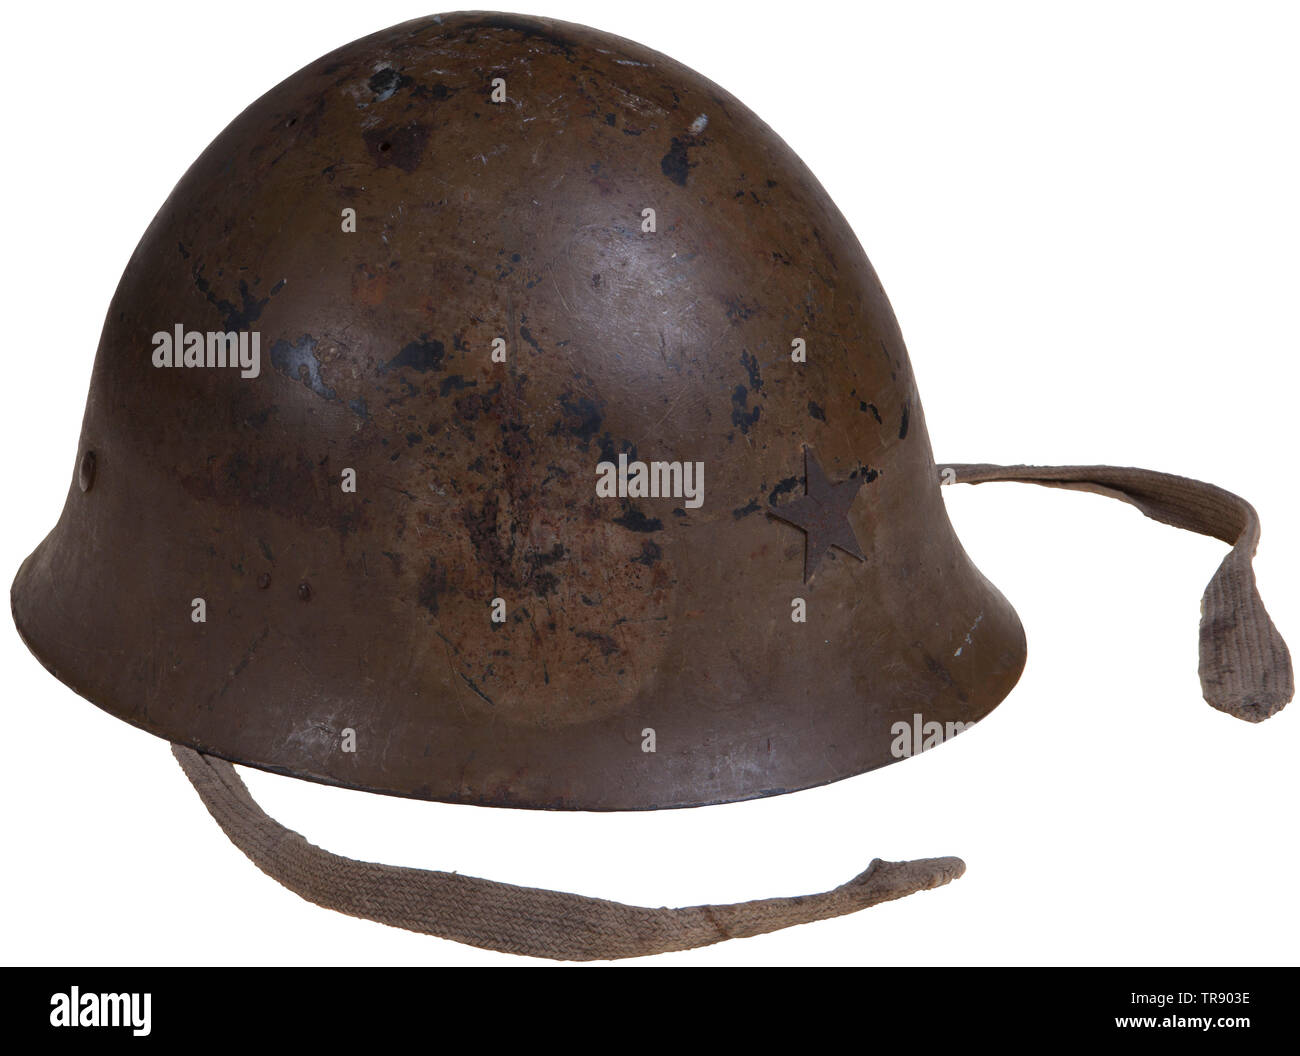 A Japanese WWII army combat helmet Standard issue example retaining 80% of khaki colour paint. Complete with metal star, web chin strap, and fine leather liner. U.S. veteran's name and Japanese soldier's name noted inside. USA-lot, see page 4. historic, historical, Japanese, Asian, Asia, Far East, object, objects, stills, clipping, clippings, cut out, cut-out, cut-outs, 20th century, Editorial-Use-Only Stock Photo